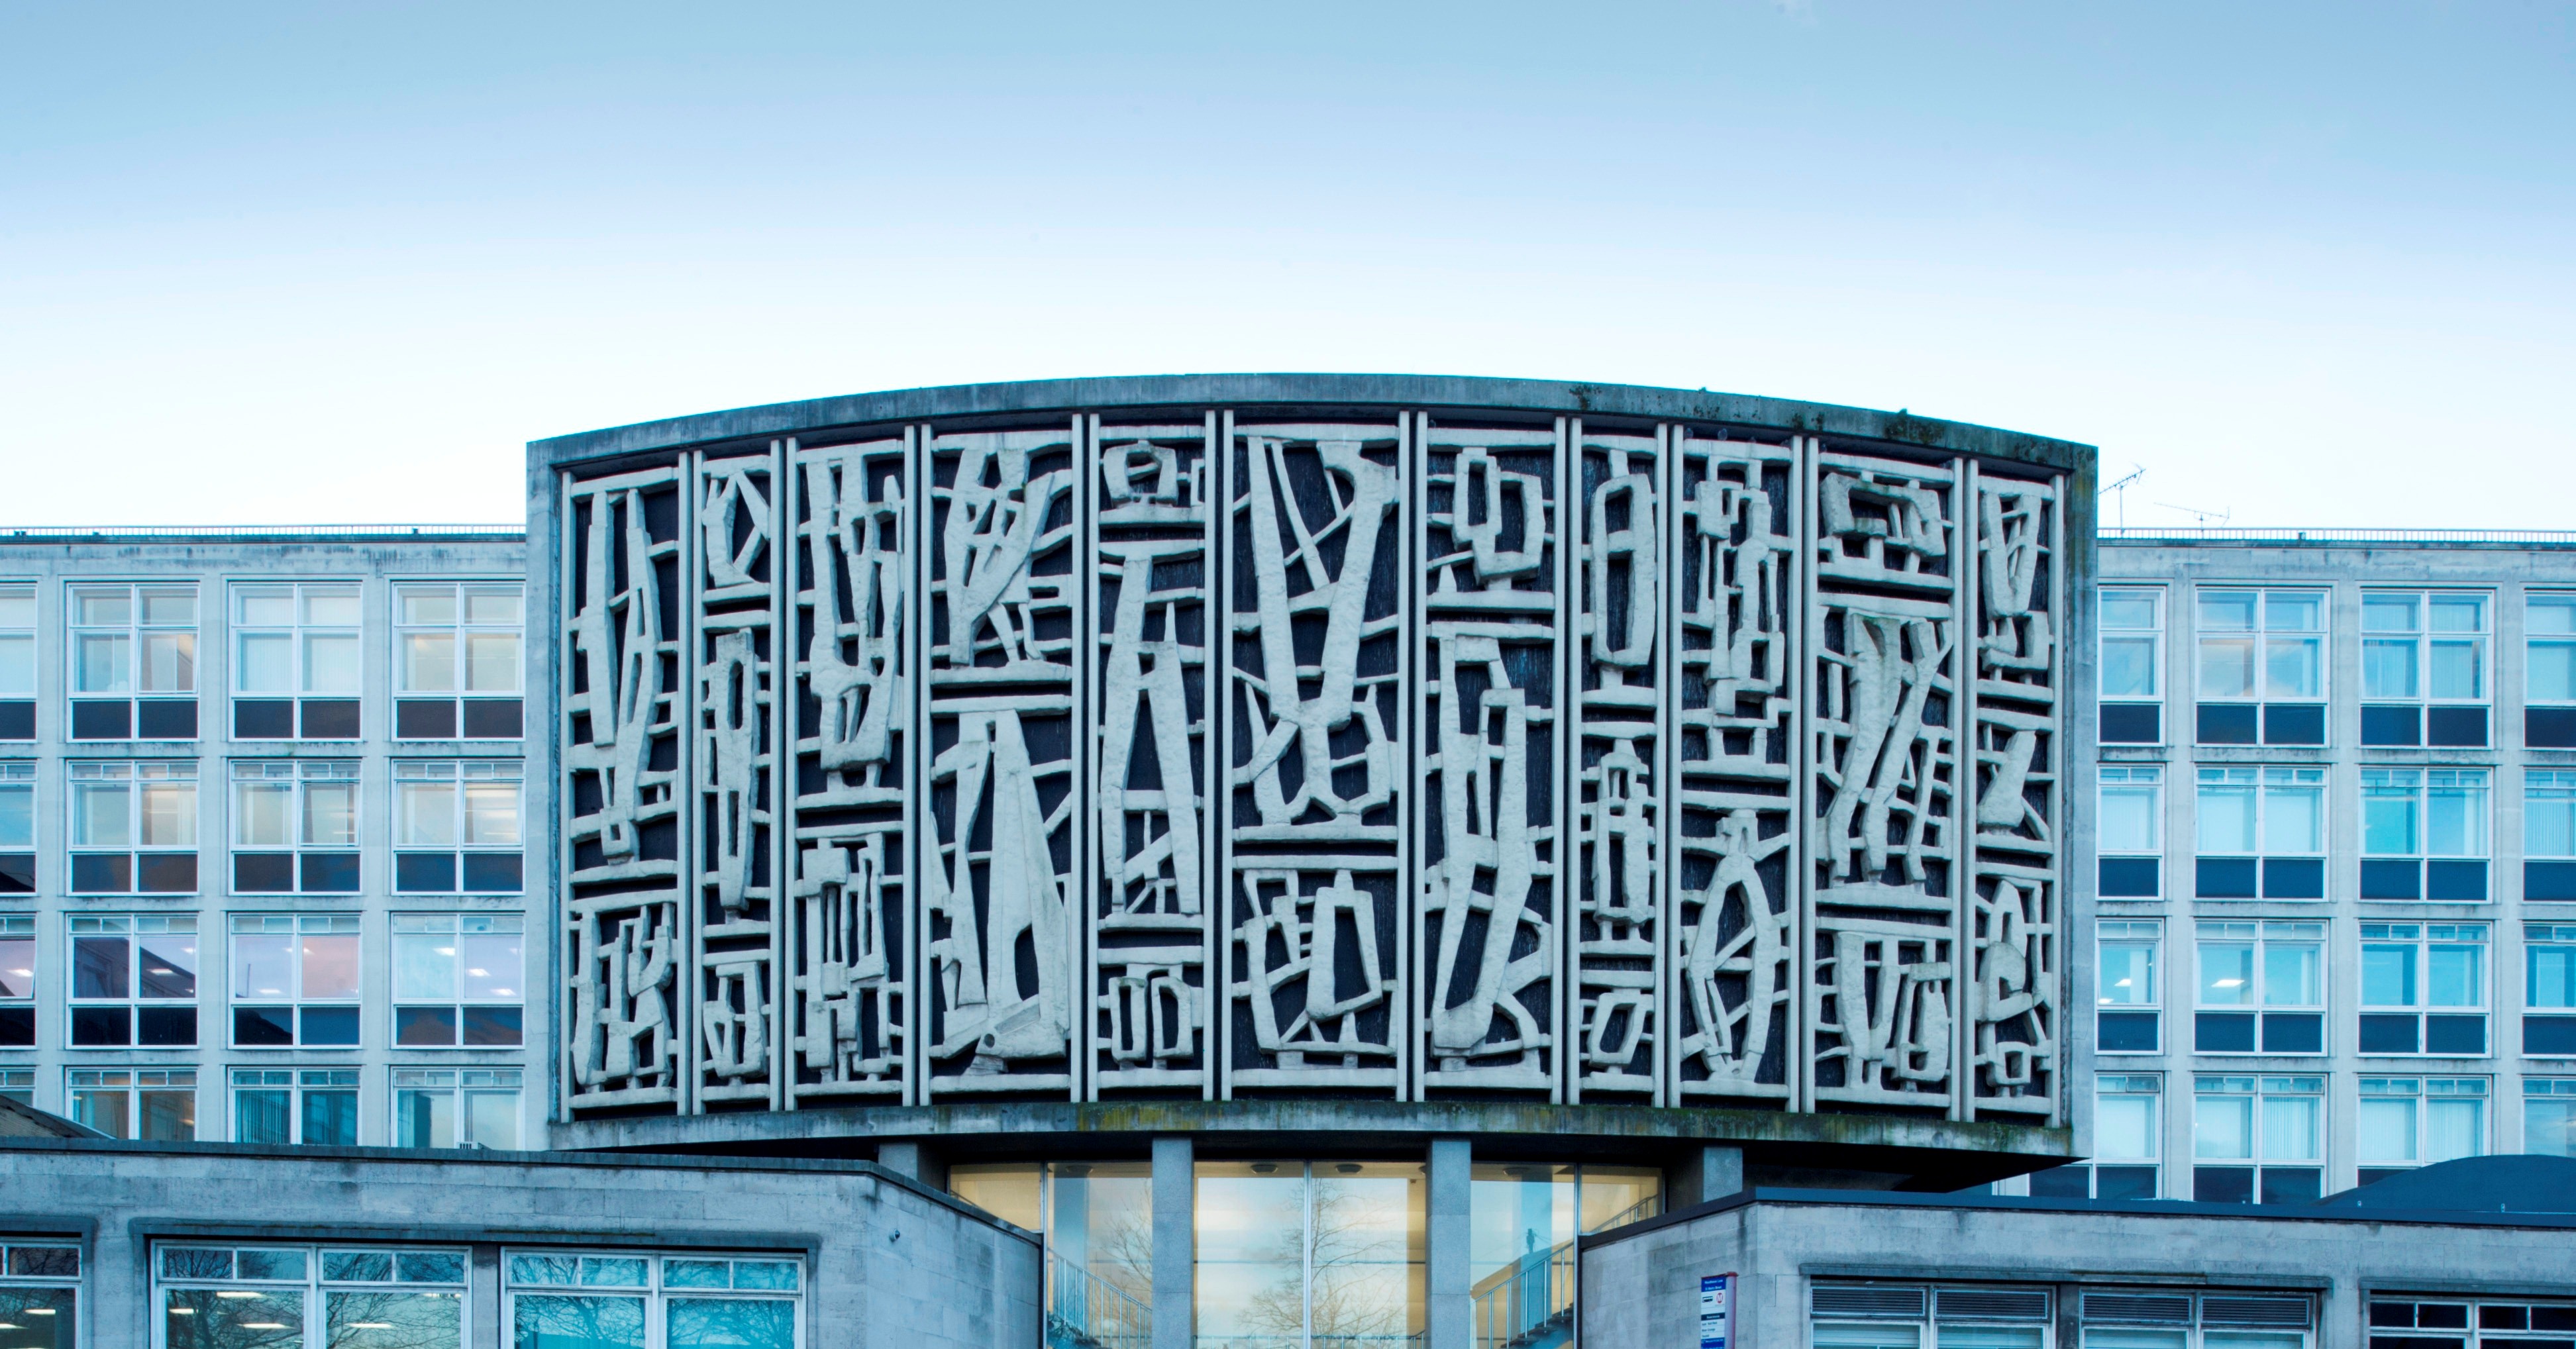 A Celebration of Engineering Sciences on Department of Mechanical Engineering Building at University of Leeds by Allen Johnson, 1963. Listed Grade II